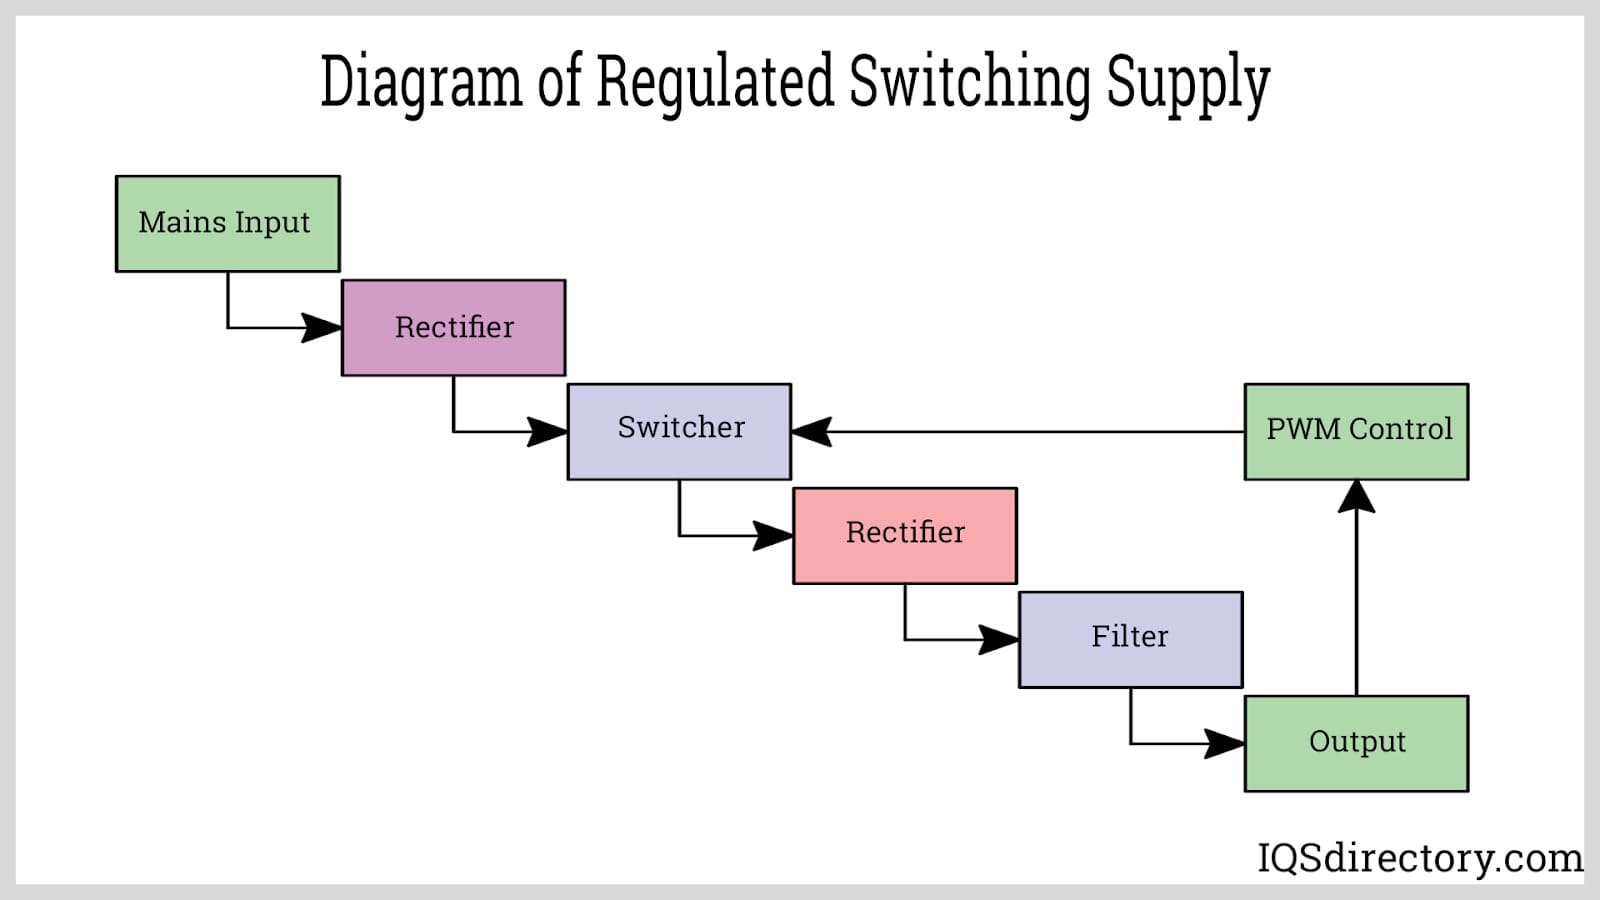 Diagram of Regulated Switching Supply